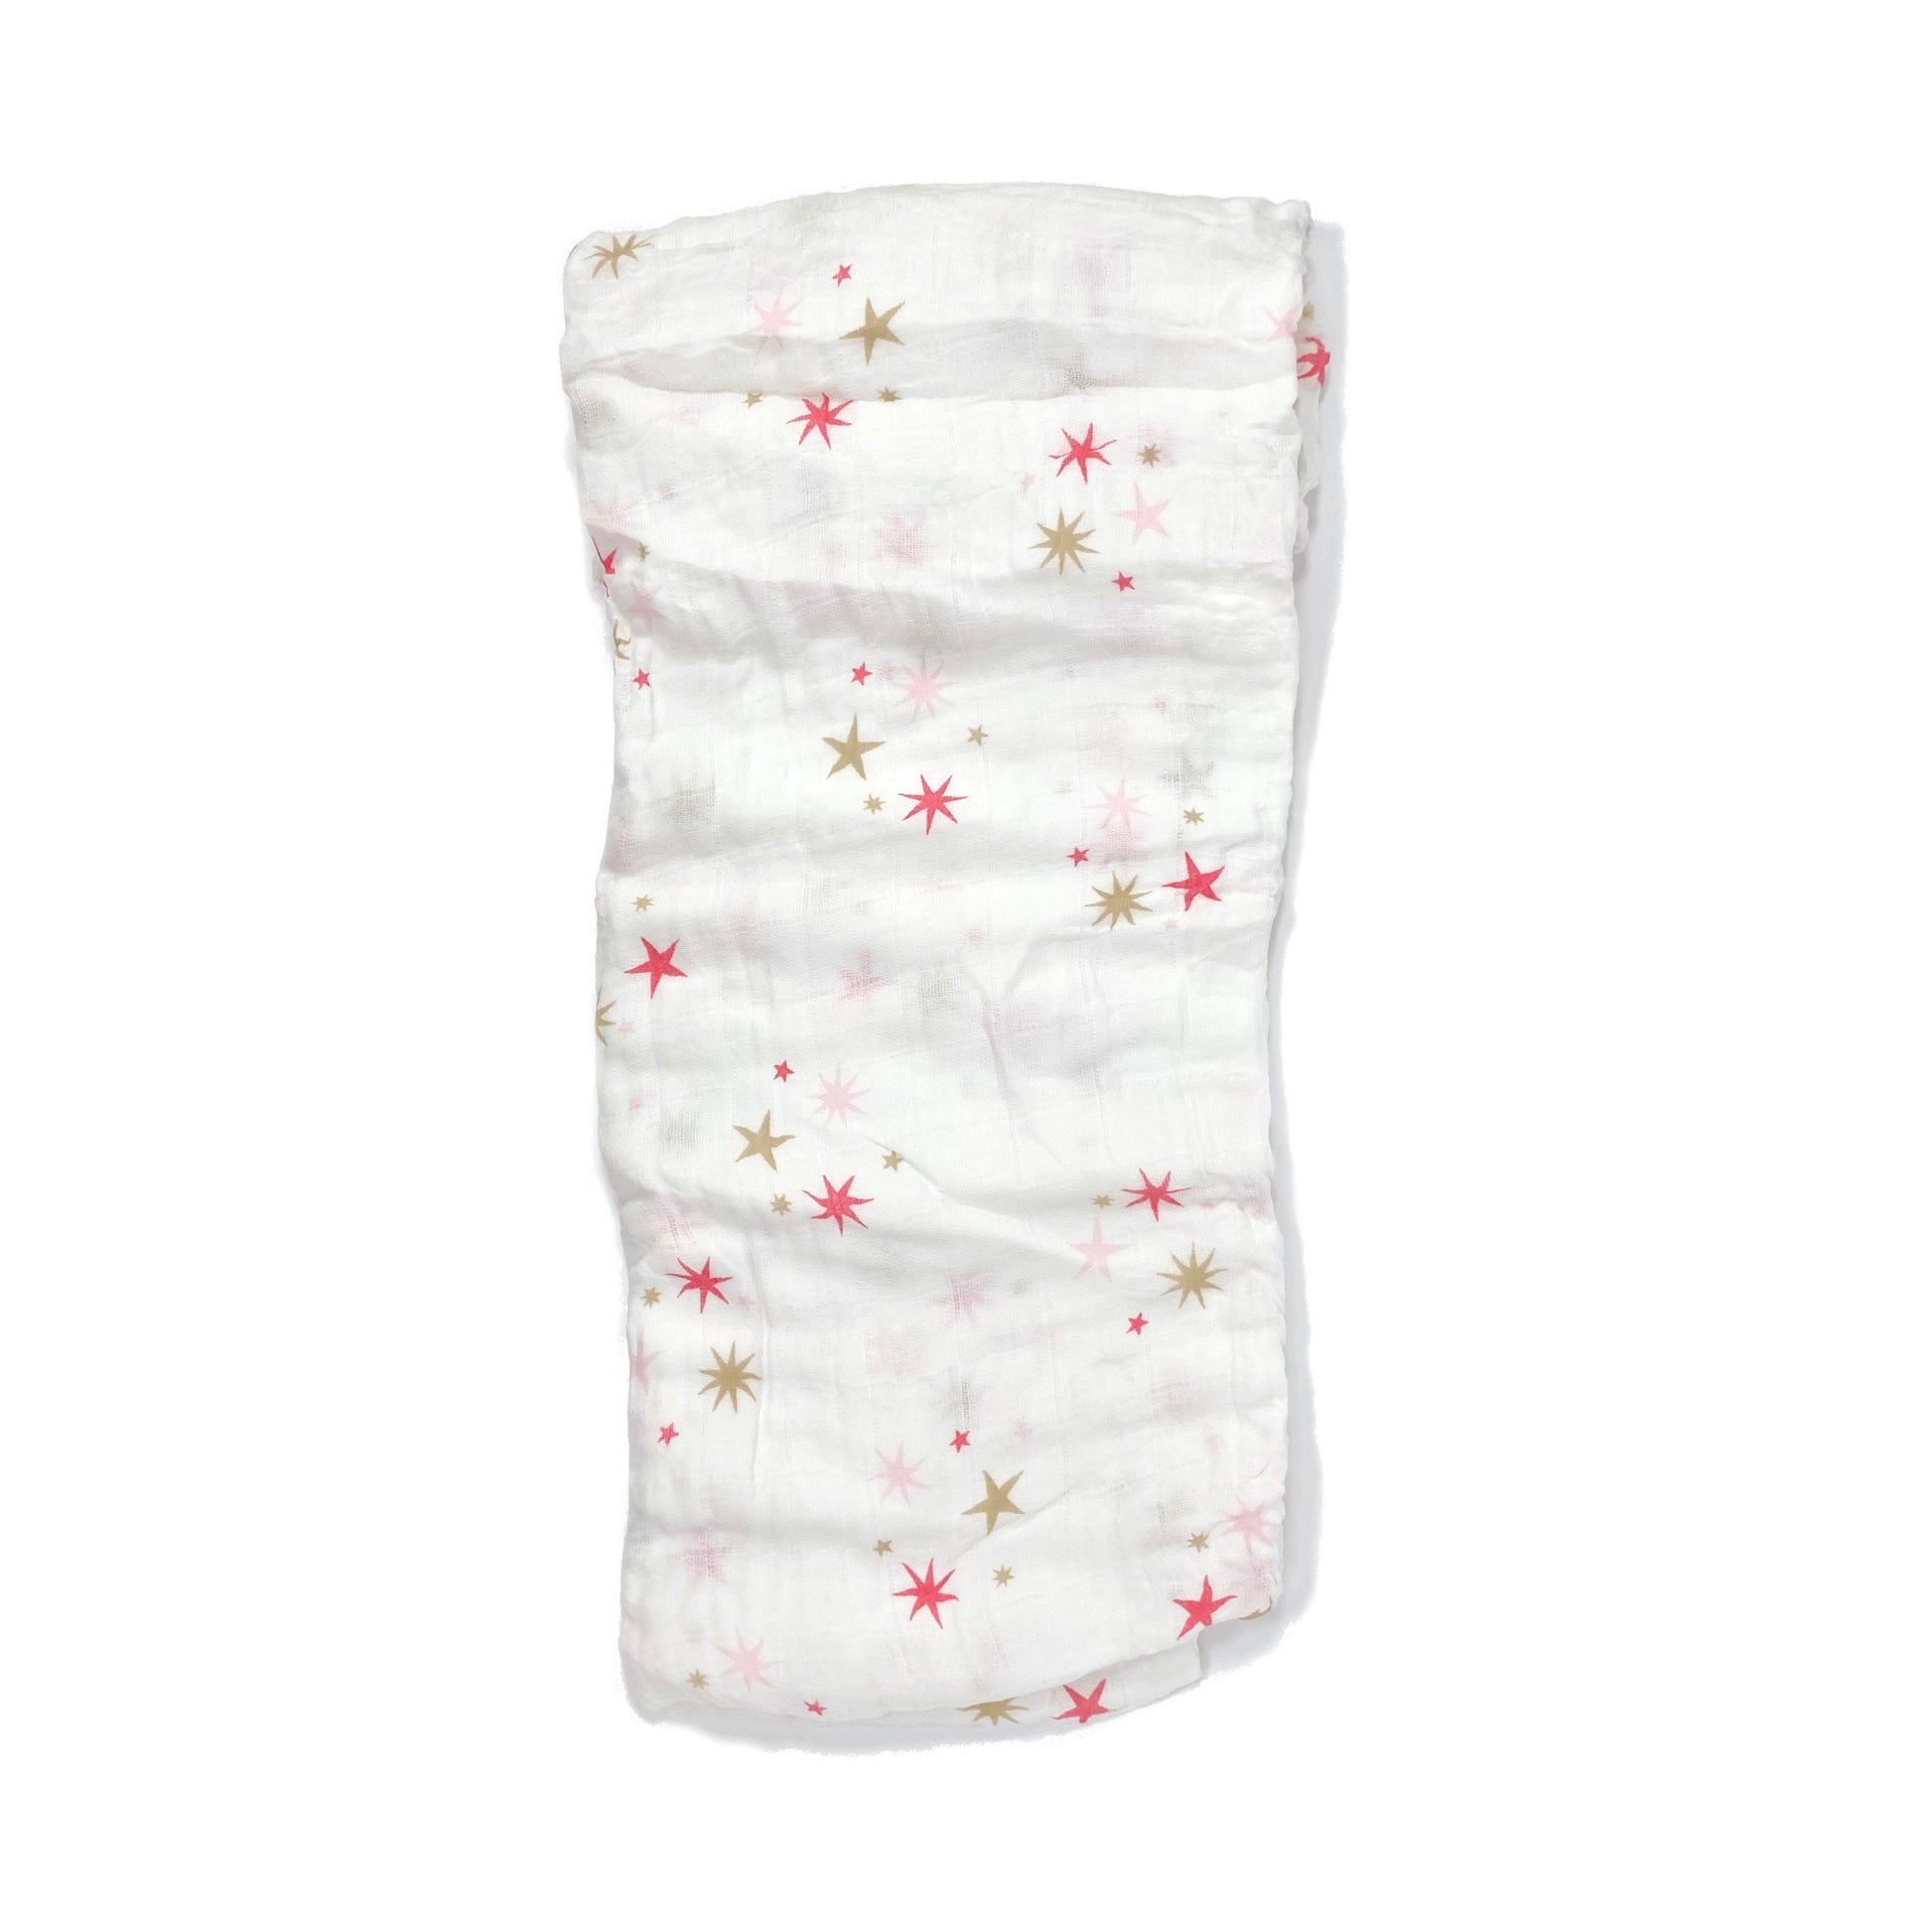 A folded muslin swaddle blanket with a pink stars design.